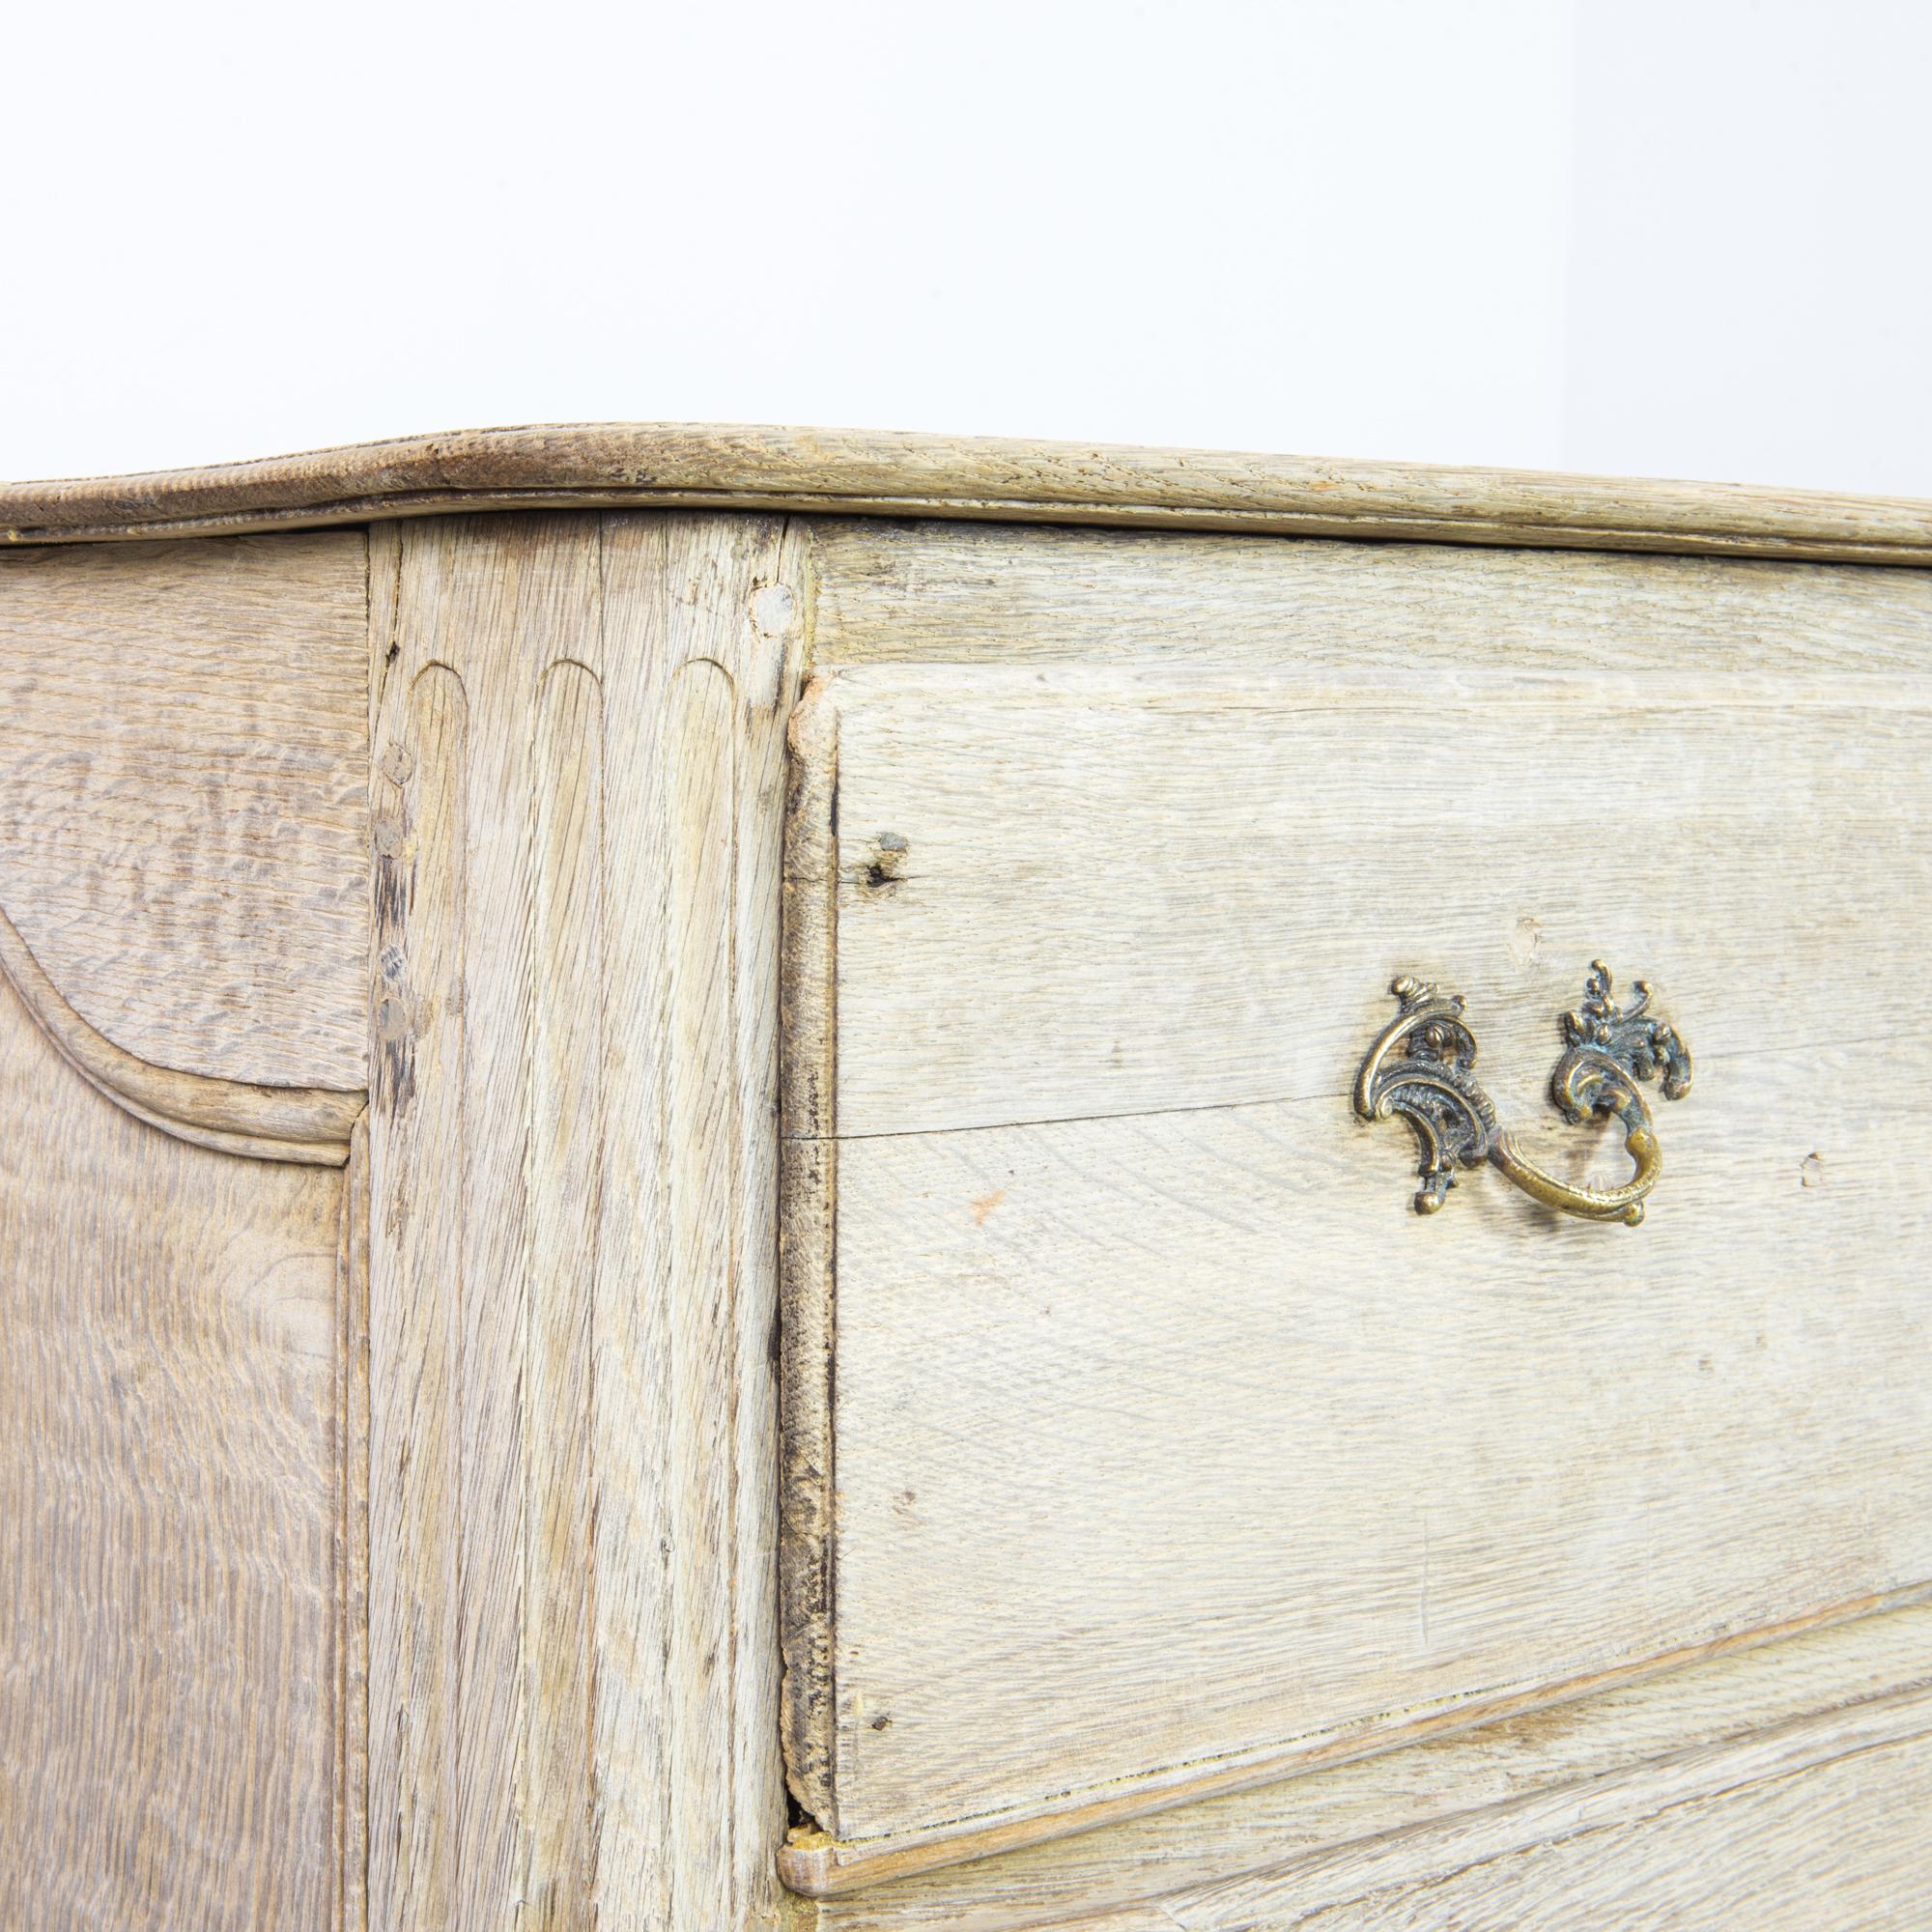 Made in France, circa 1860, this bleached oak chest of drawers enchants with its intricacies and fine workmanship. The reeded corners, decorative pulls, and elaborately carved apron of scallop shells and foliage express the beauty of the French